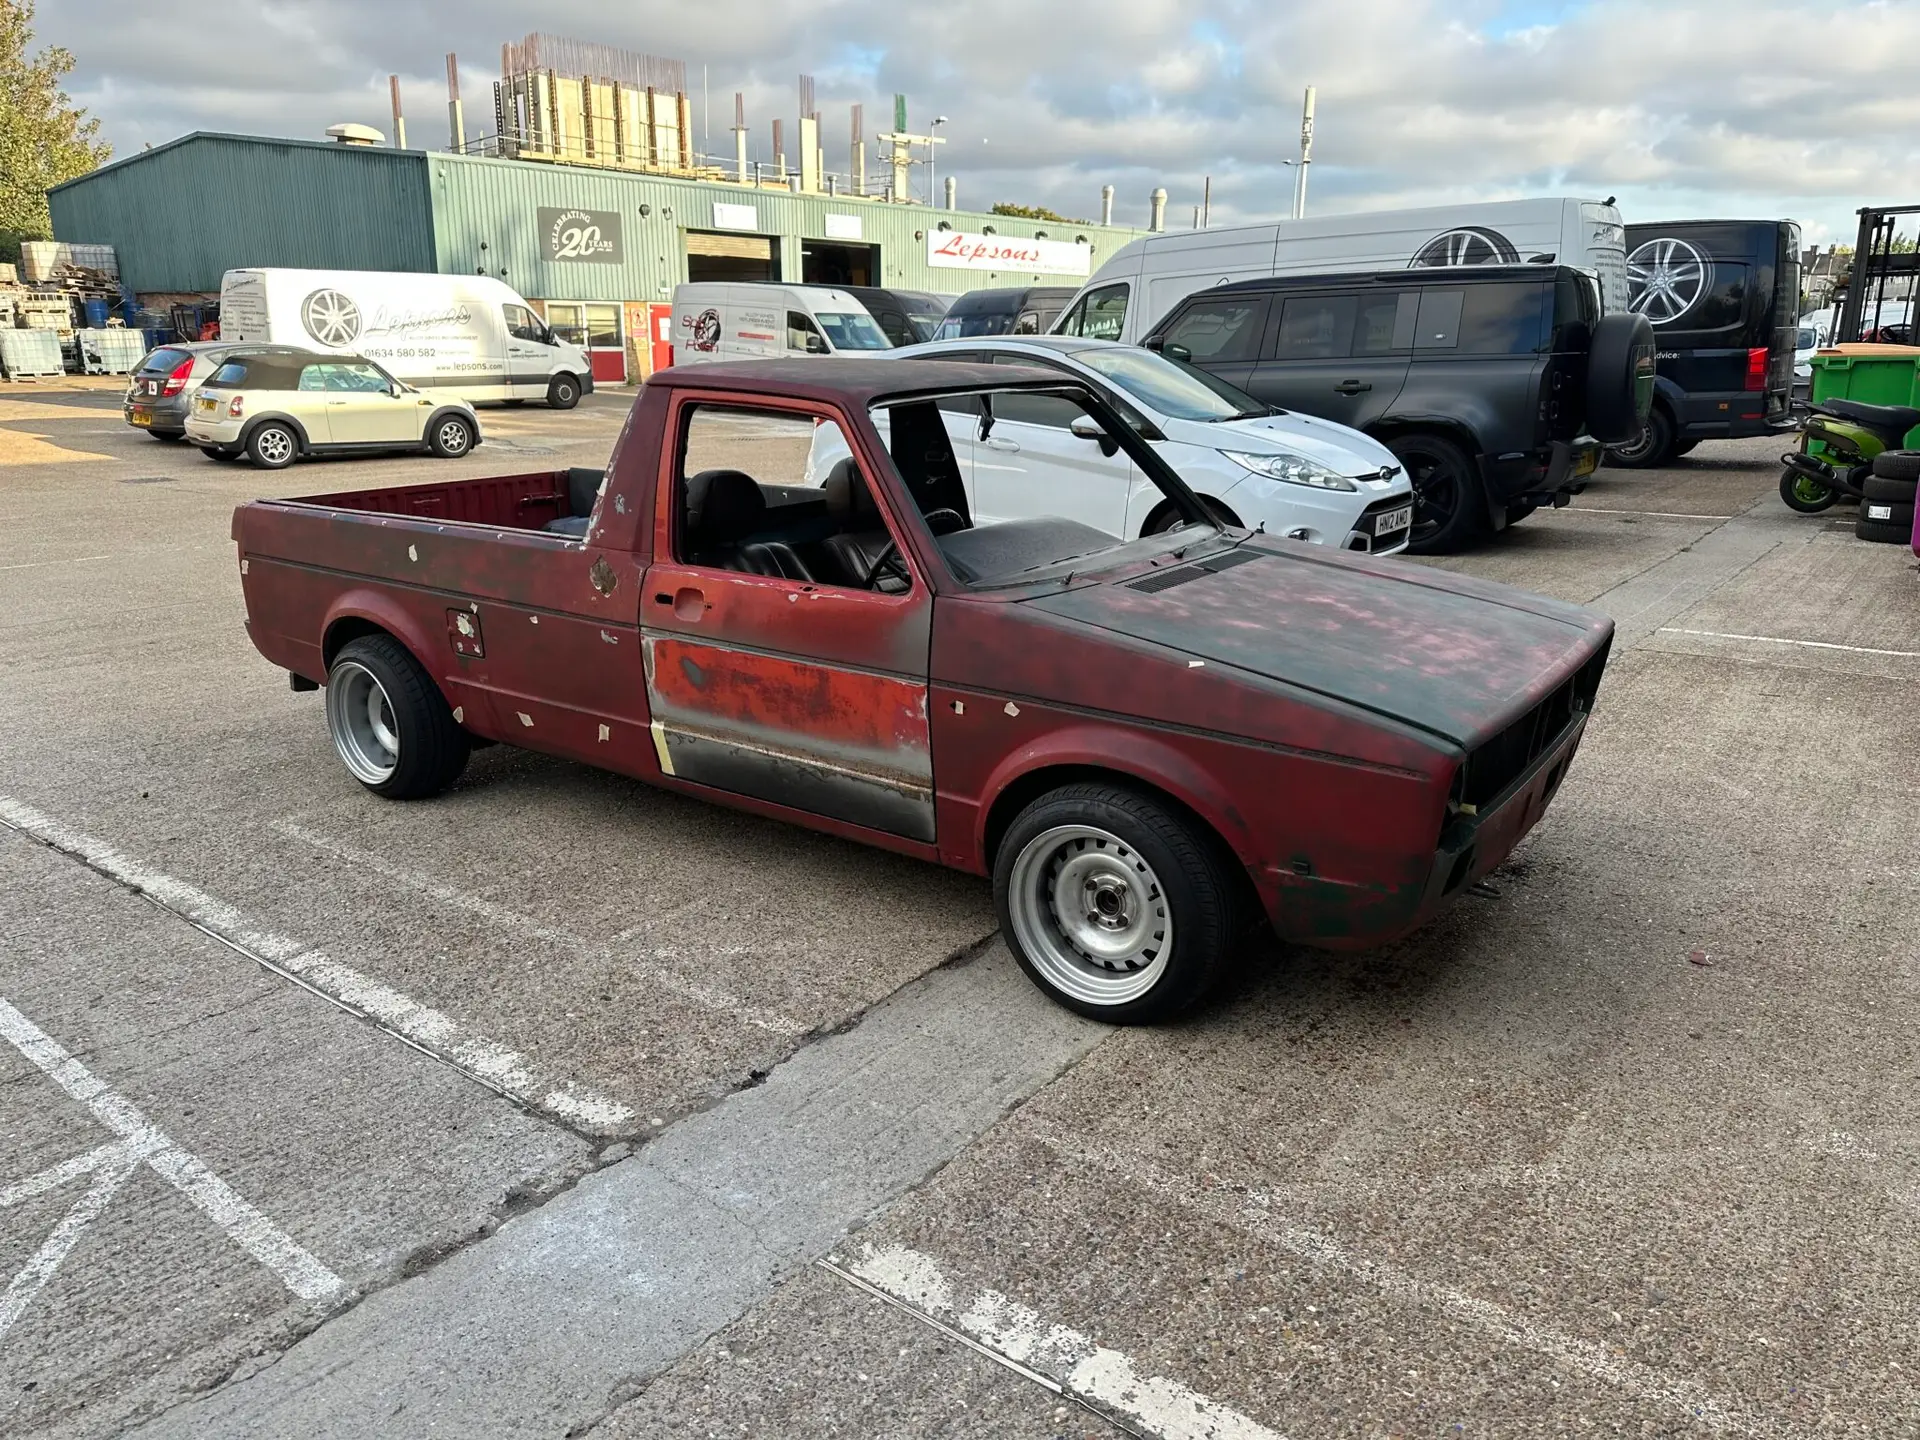 Unit-11 Chronicles: The Revival of a 1989 Volkswagen MK1 VW Caddy